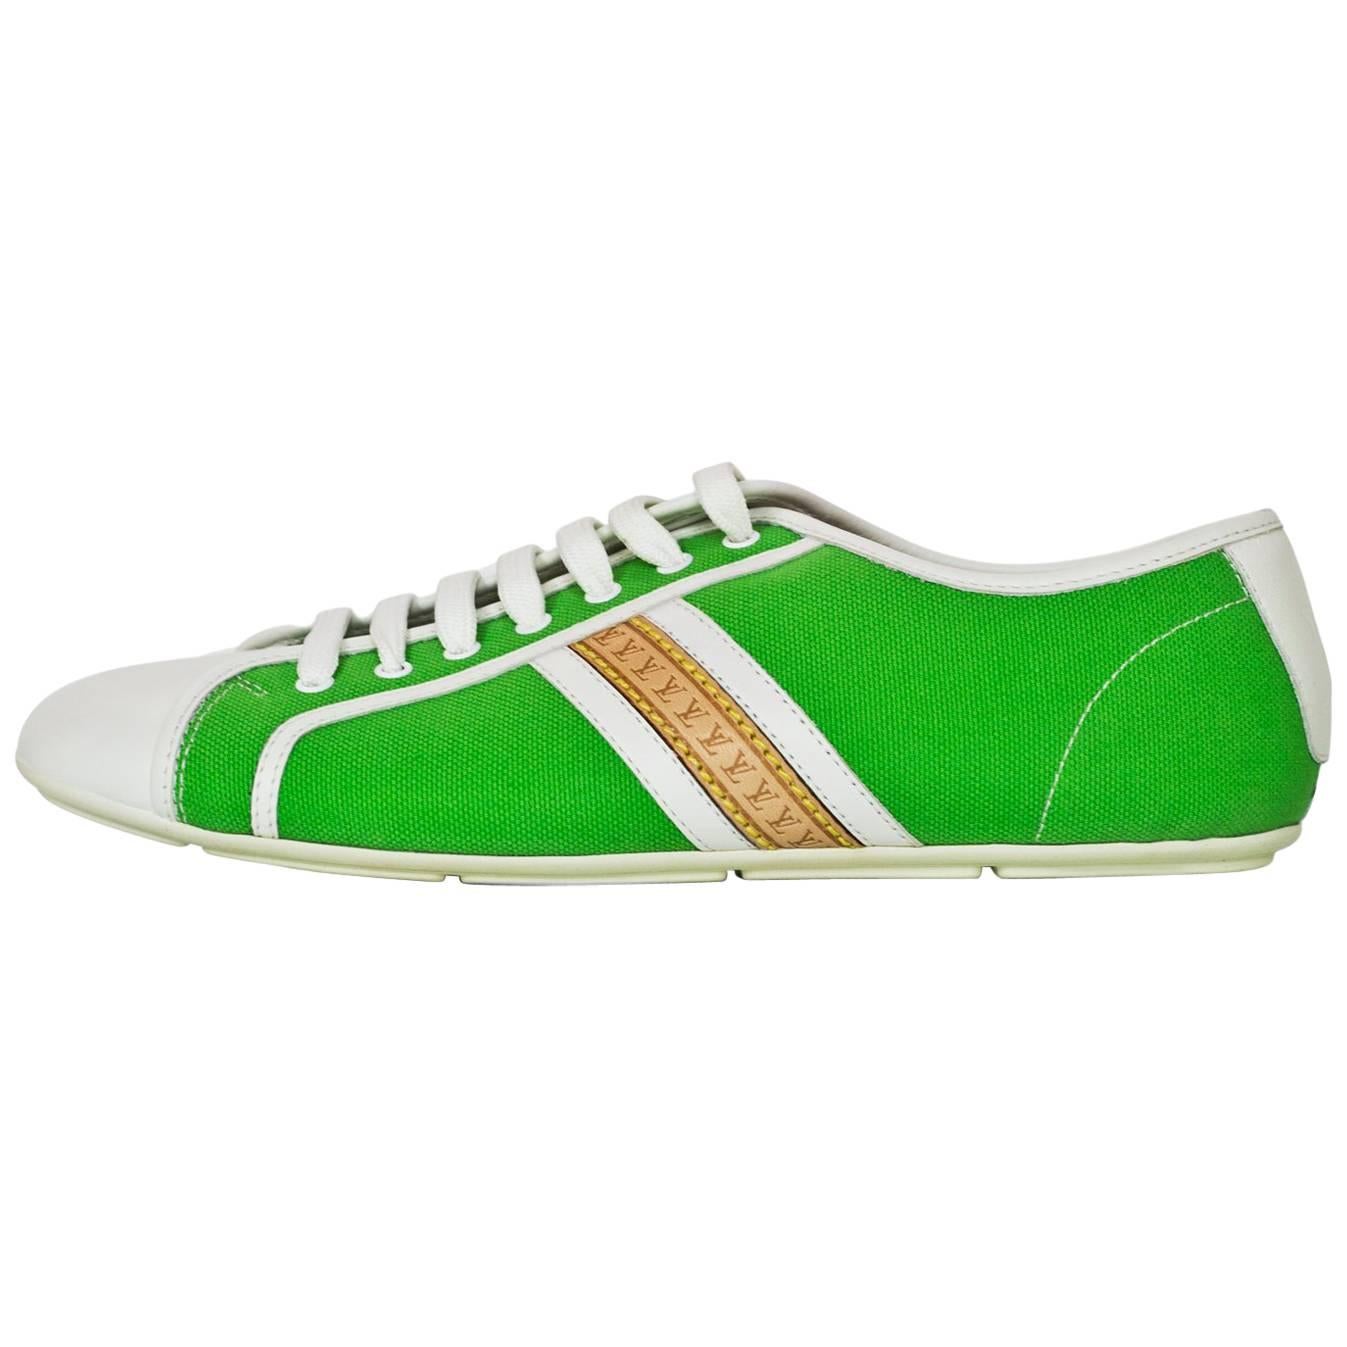 Louis Vuitton White Leather & Green Canvas Sneakers Sz 38 NEW